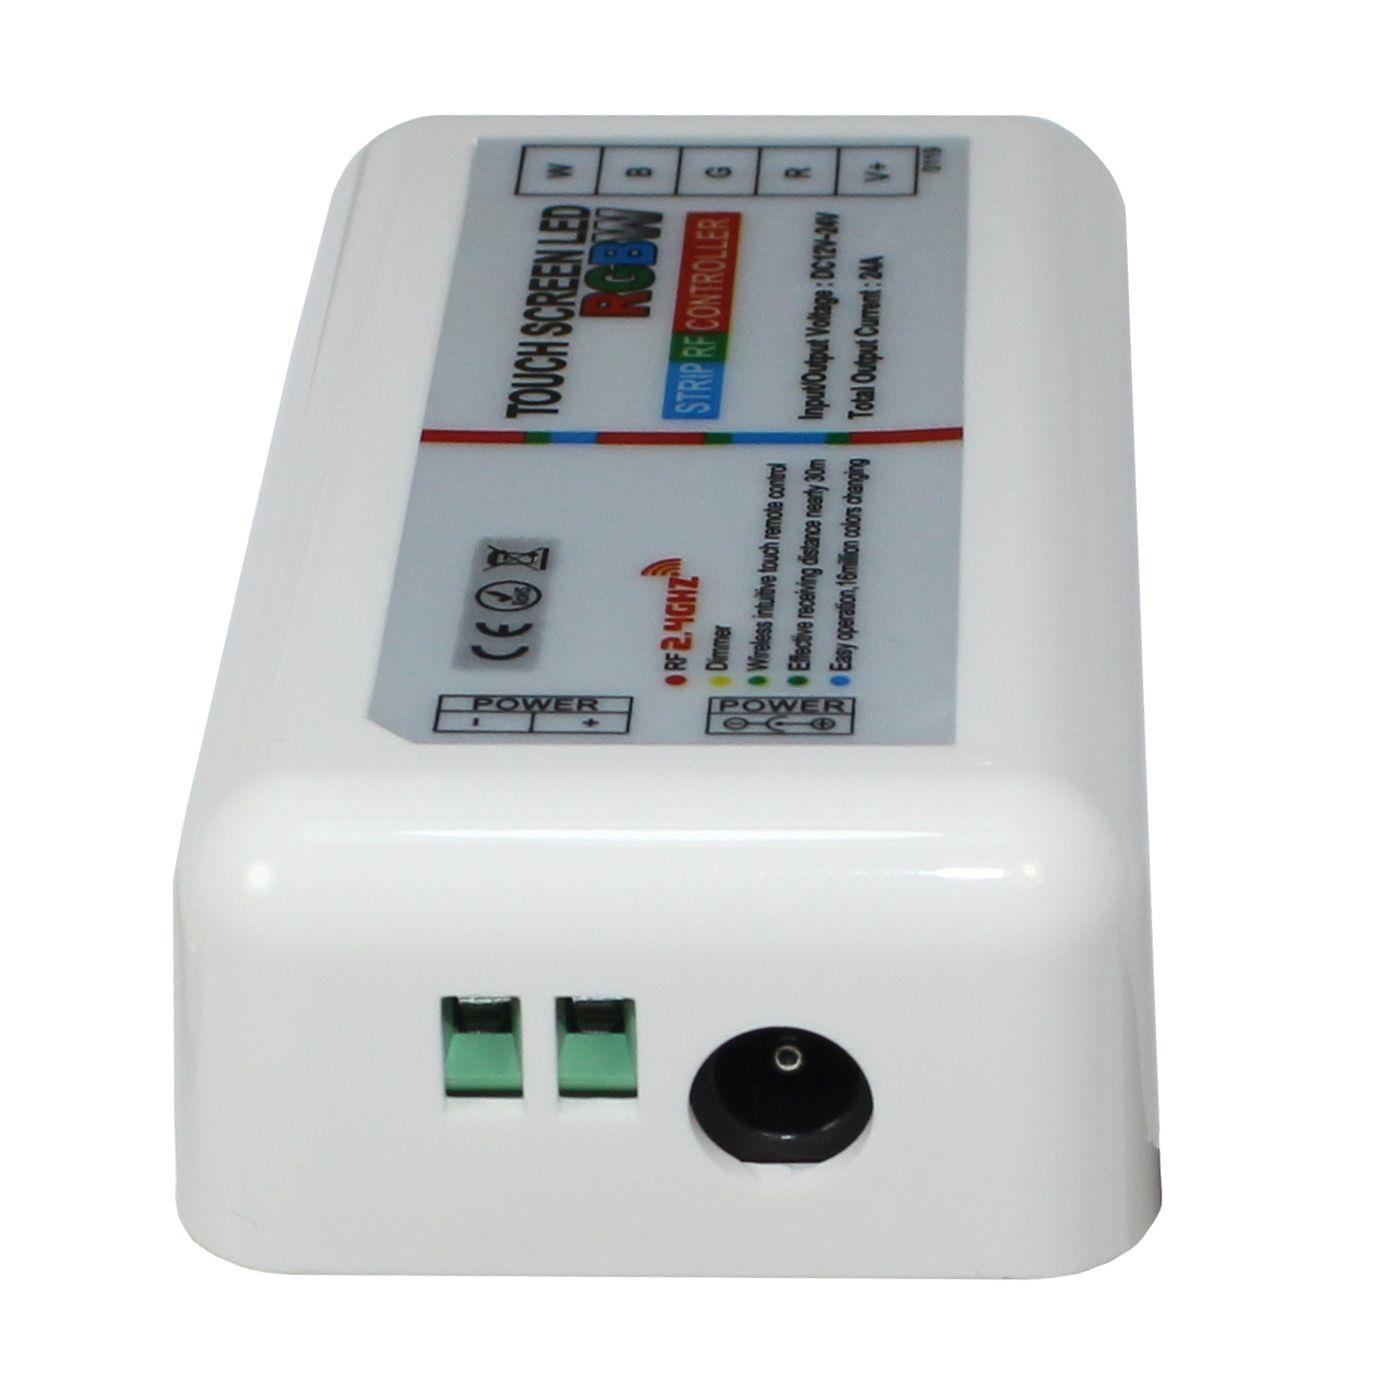 Milight RGBW LED Touch RF Controller White 12...24V 240W for colour changing strips 5-Pin